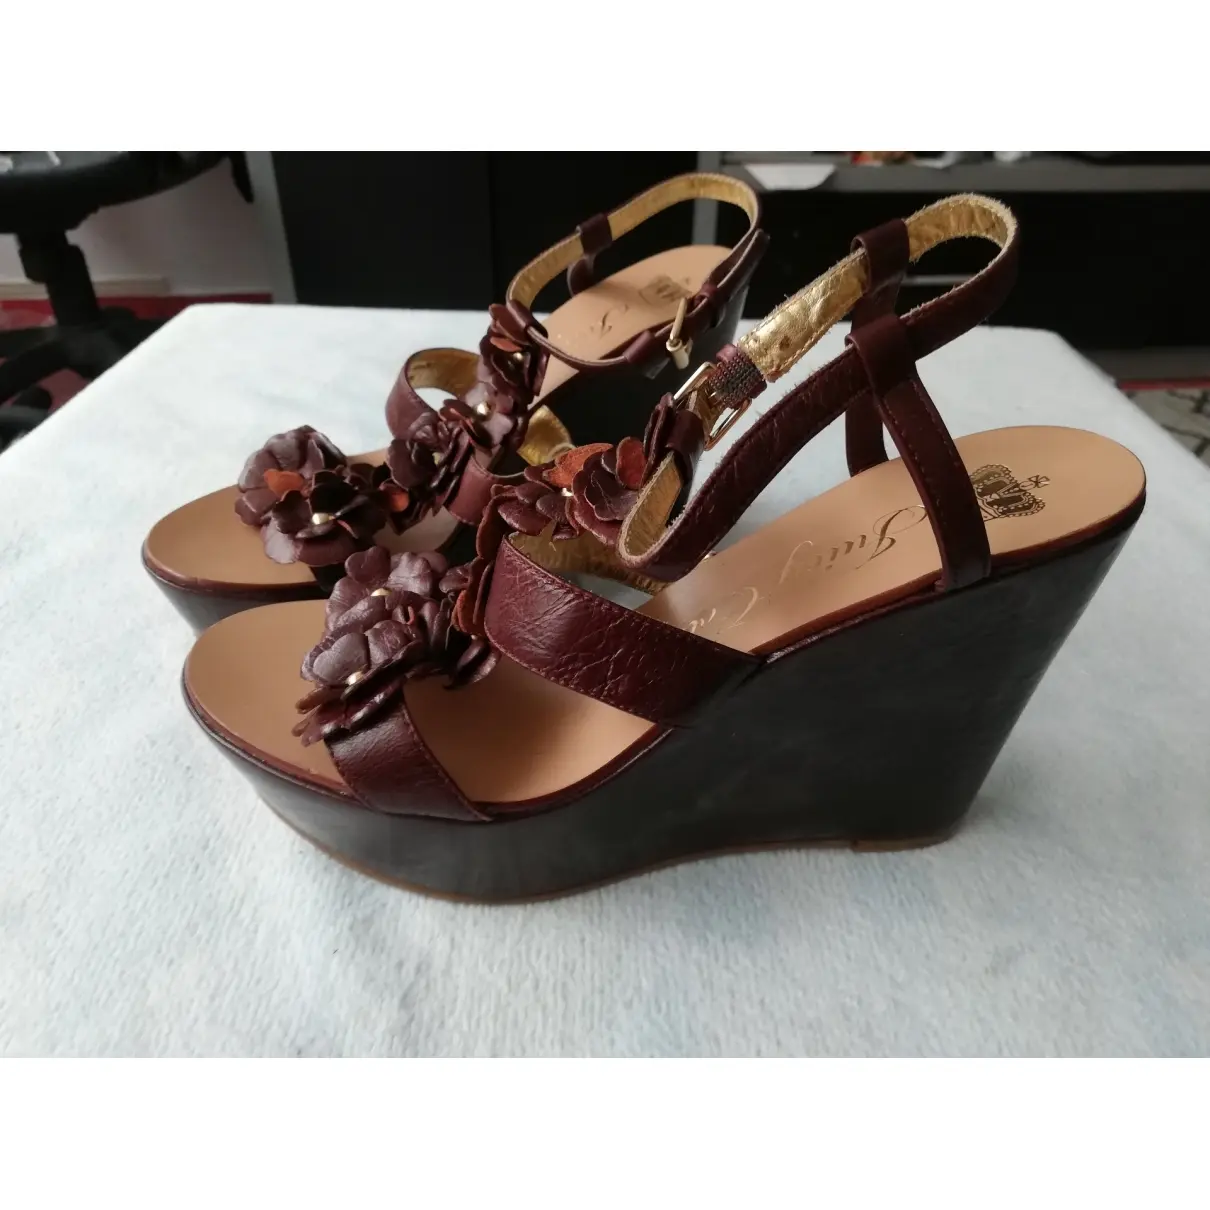 Juicy Couture Leather sandal for sale